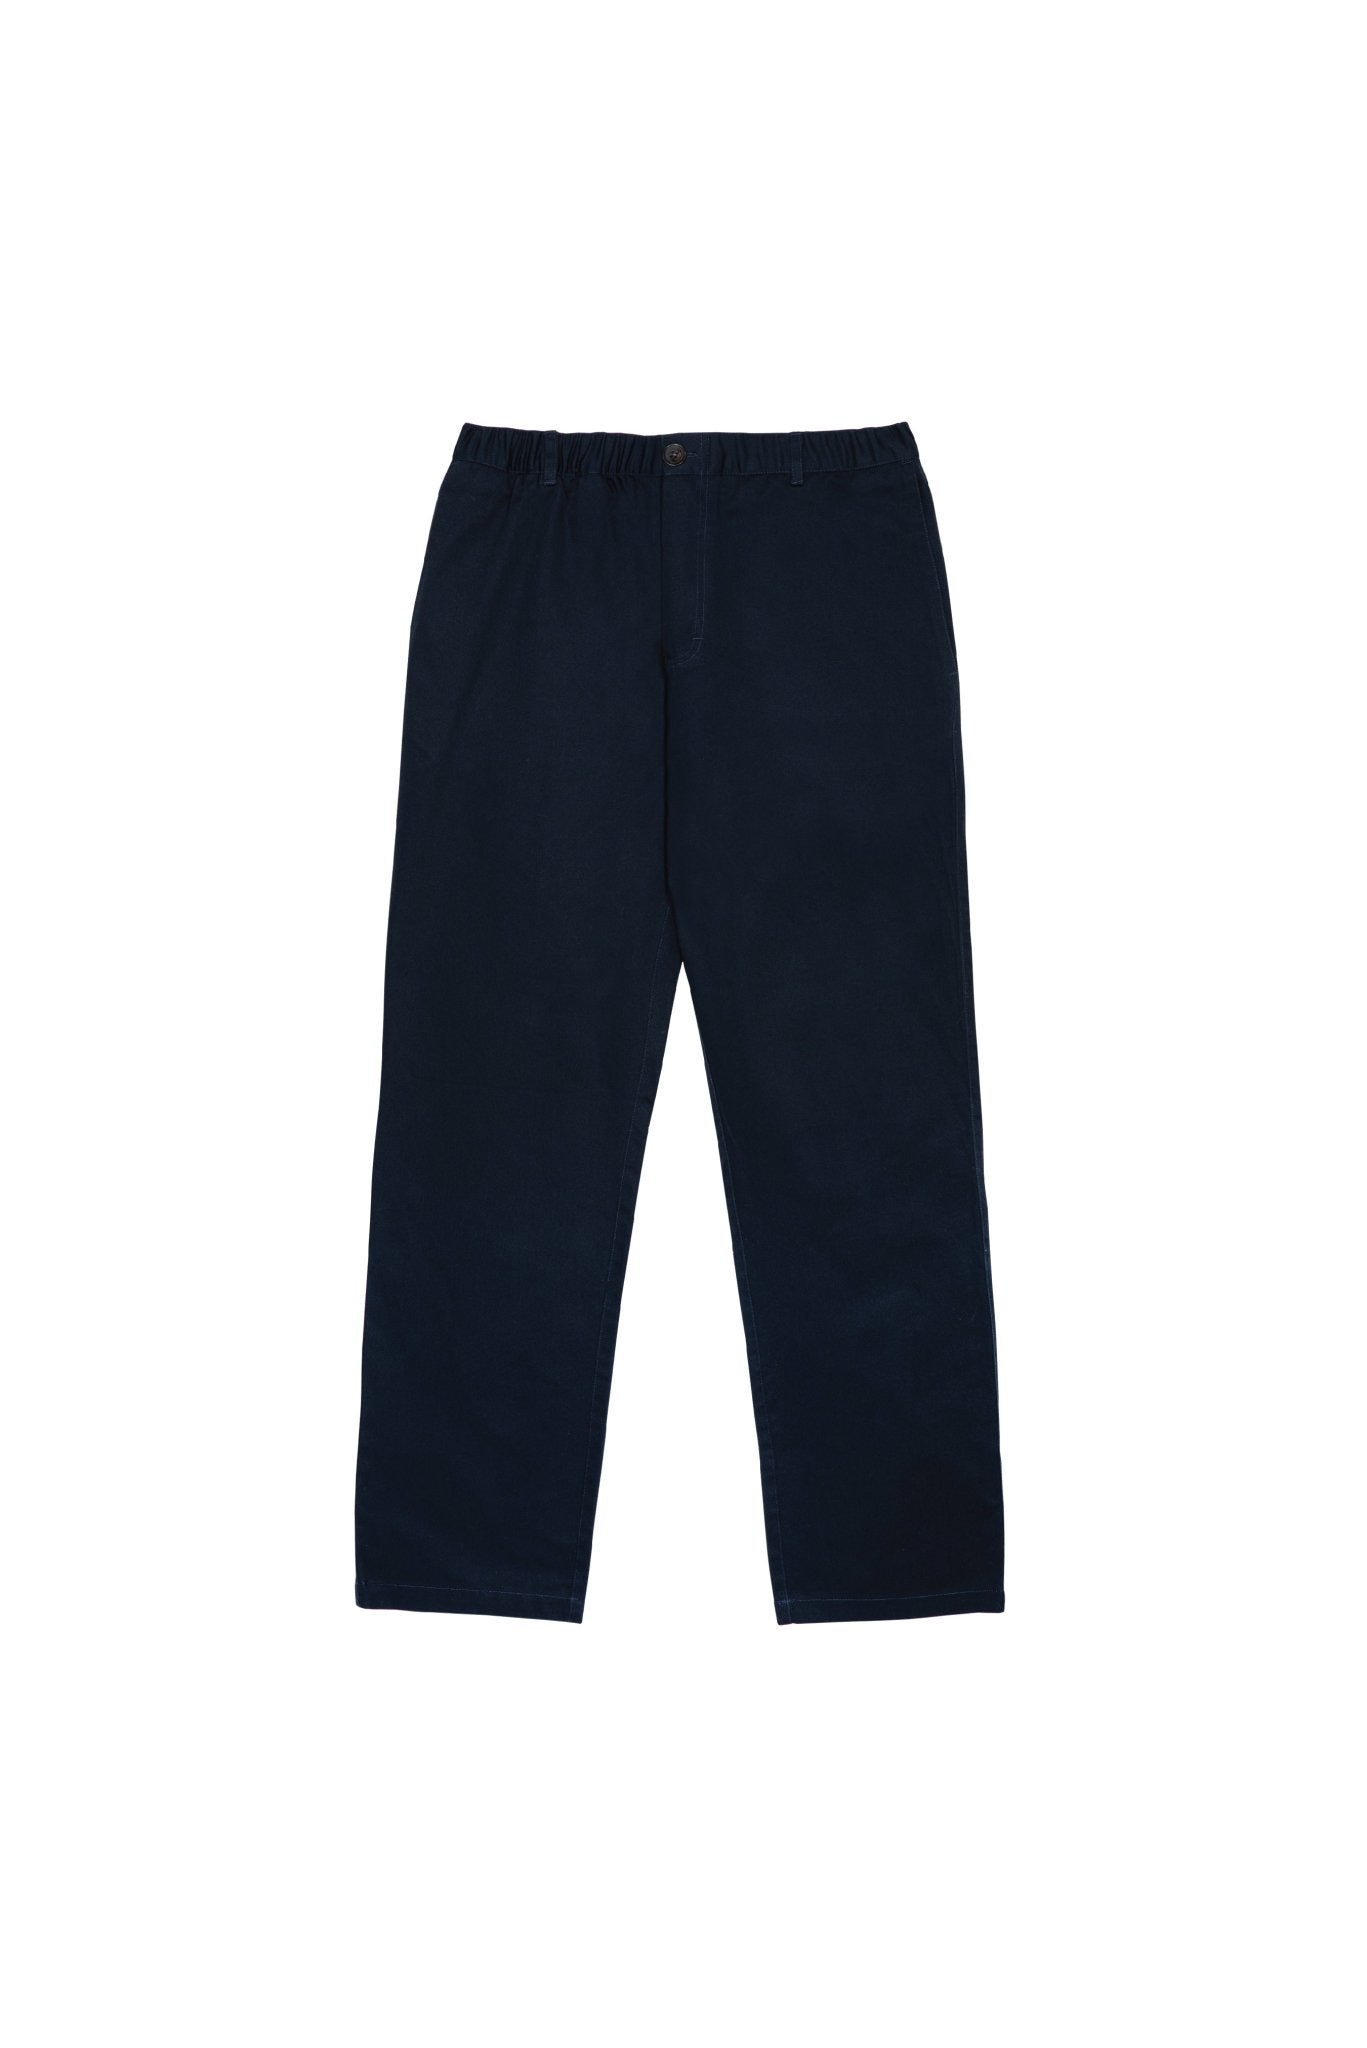 Water-resistant Easy Pants in Midnight Blue by French Brand Crest Clothing